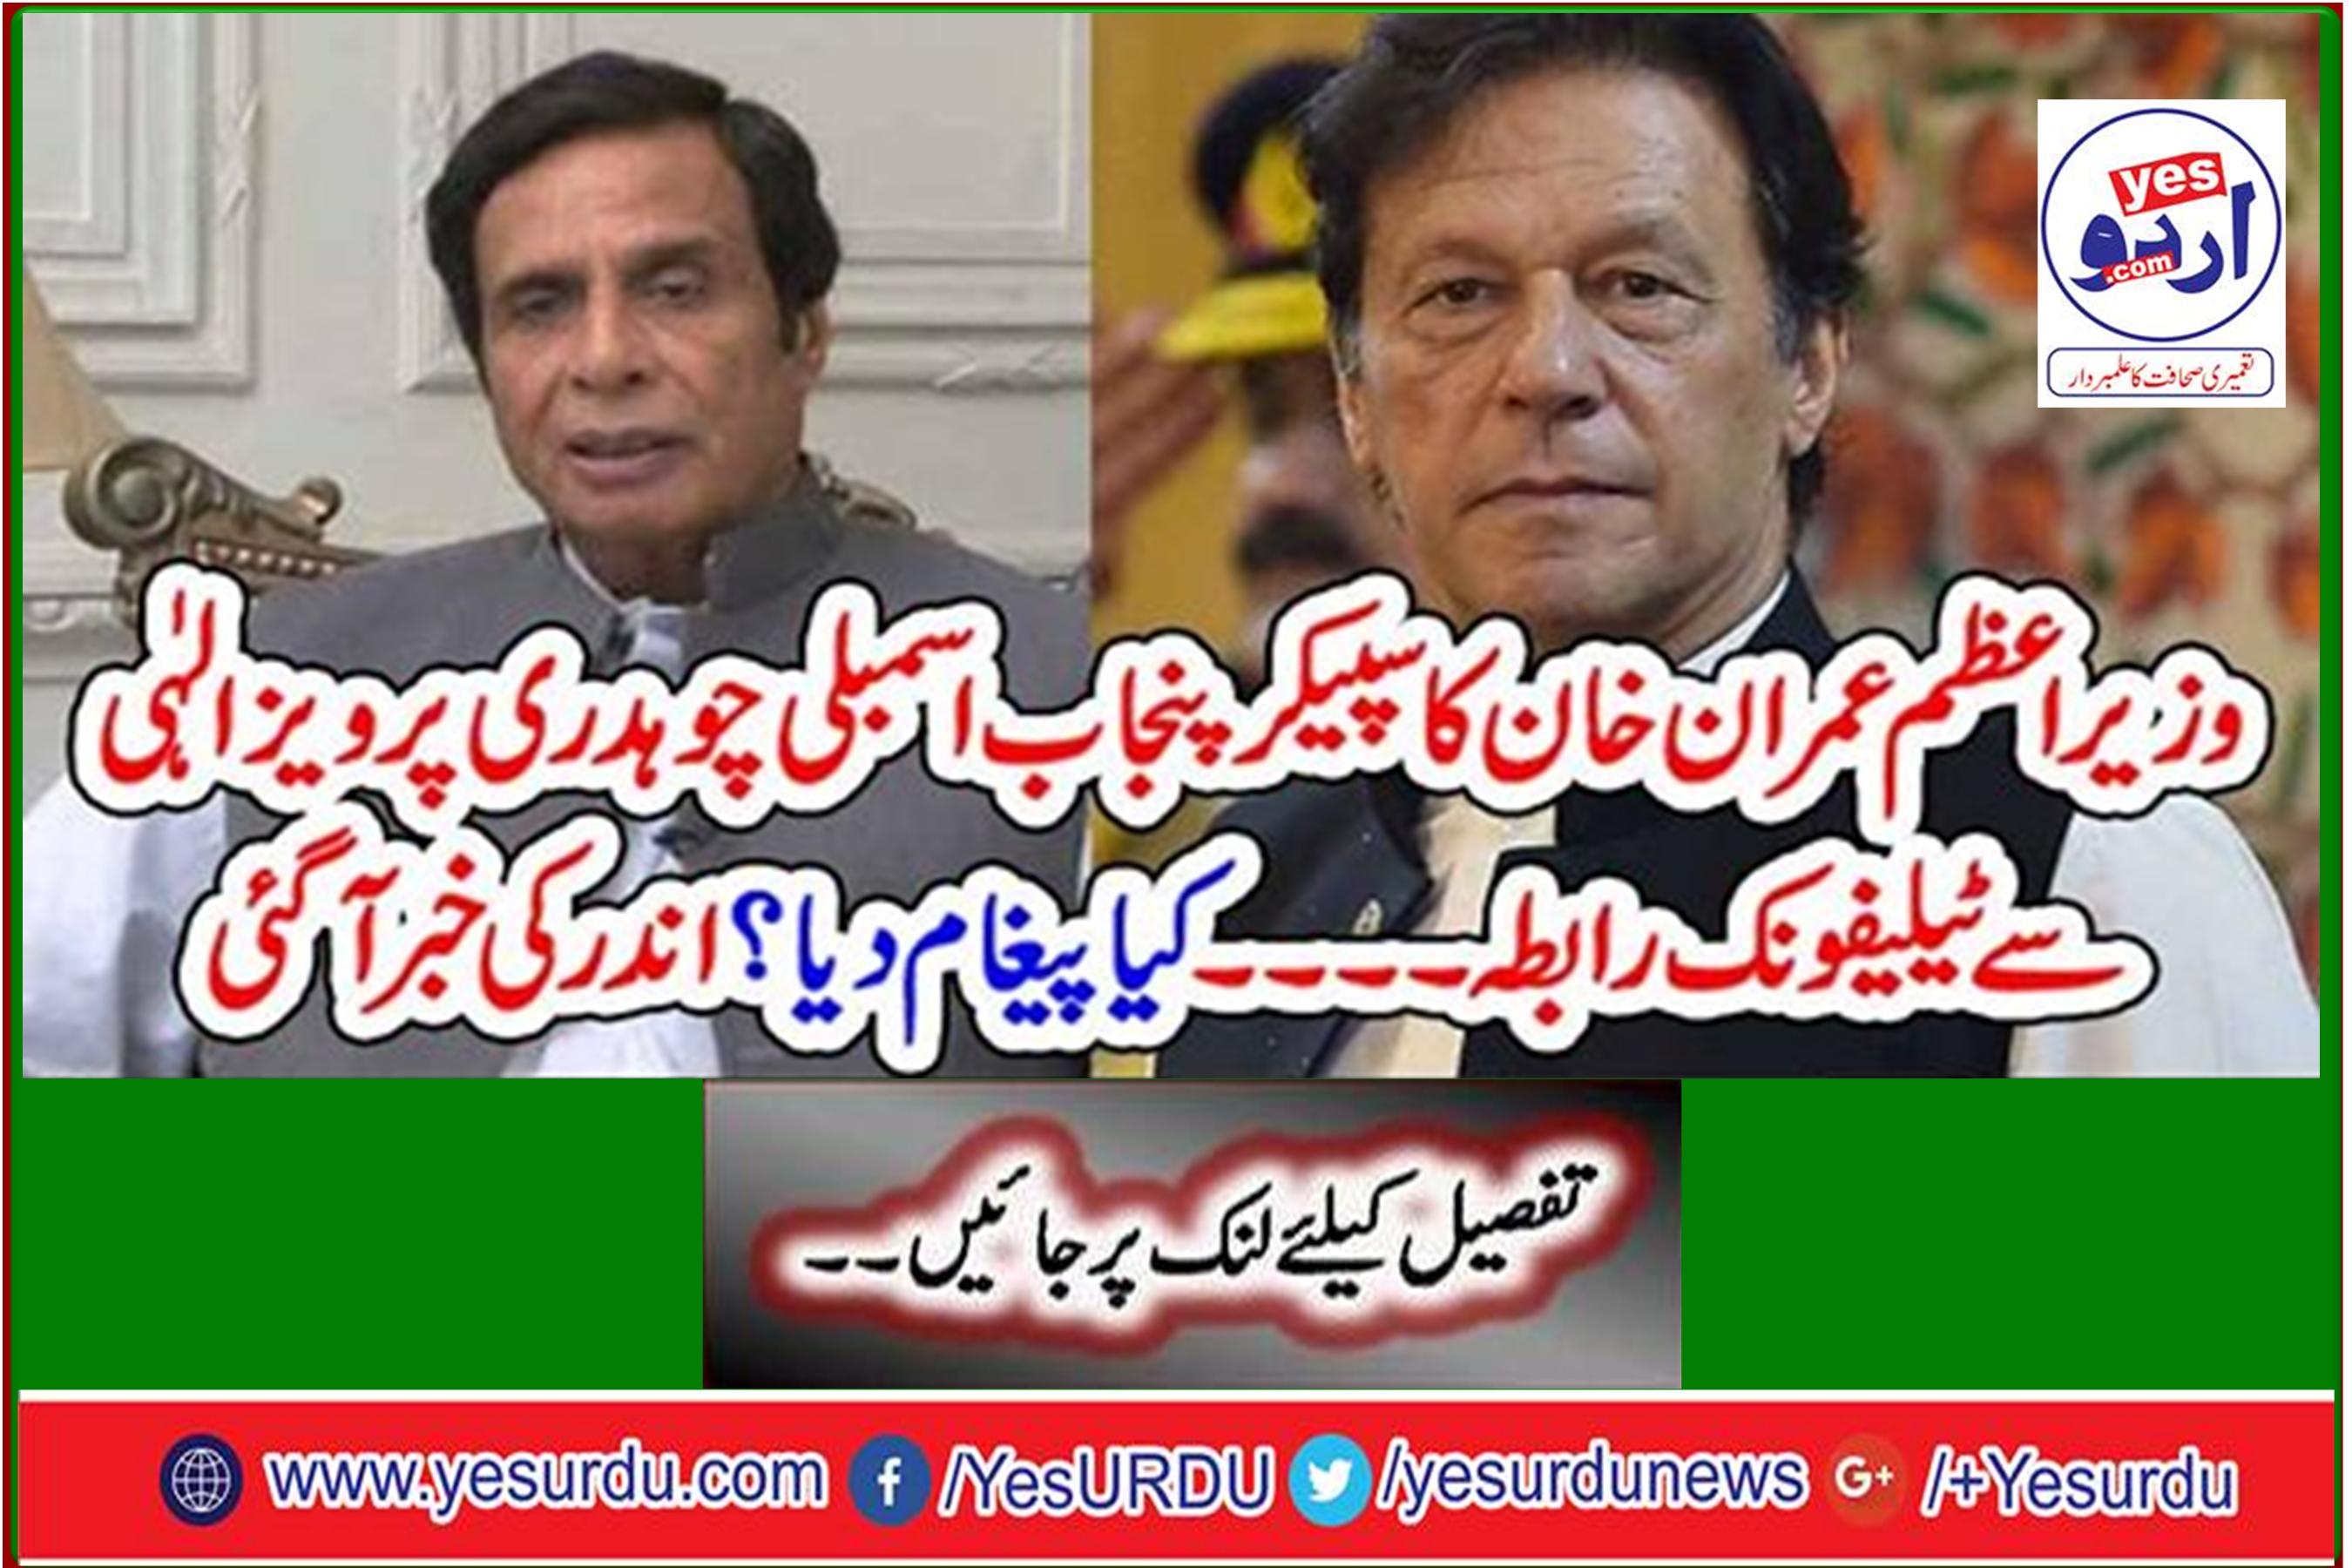 PM Imran Khan's telephonic contact with Speaker Punjab Assembly Chaudhry Pervaiz Elahi What message did you give? The news inside came